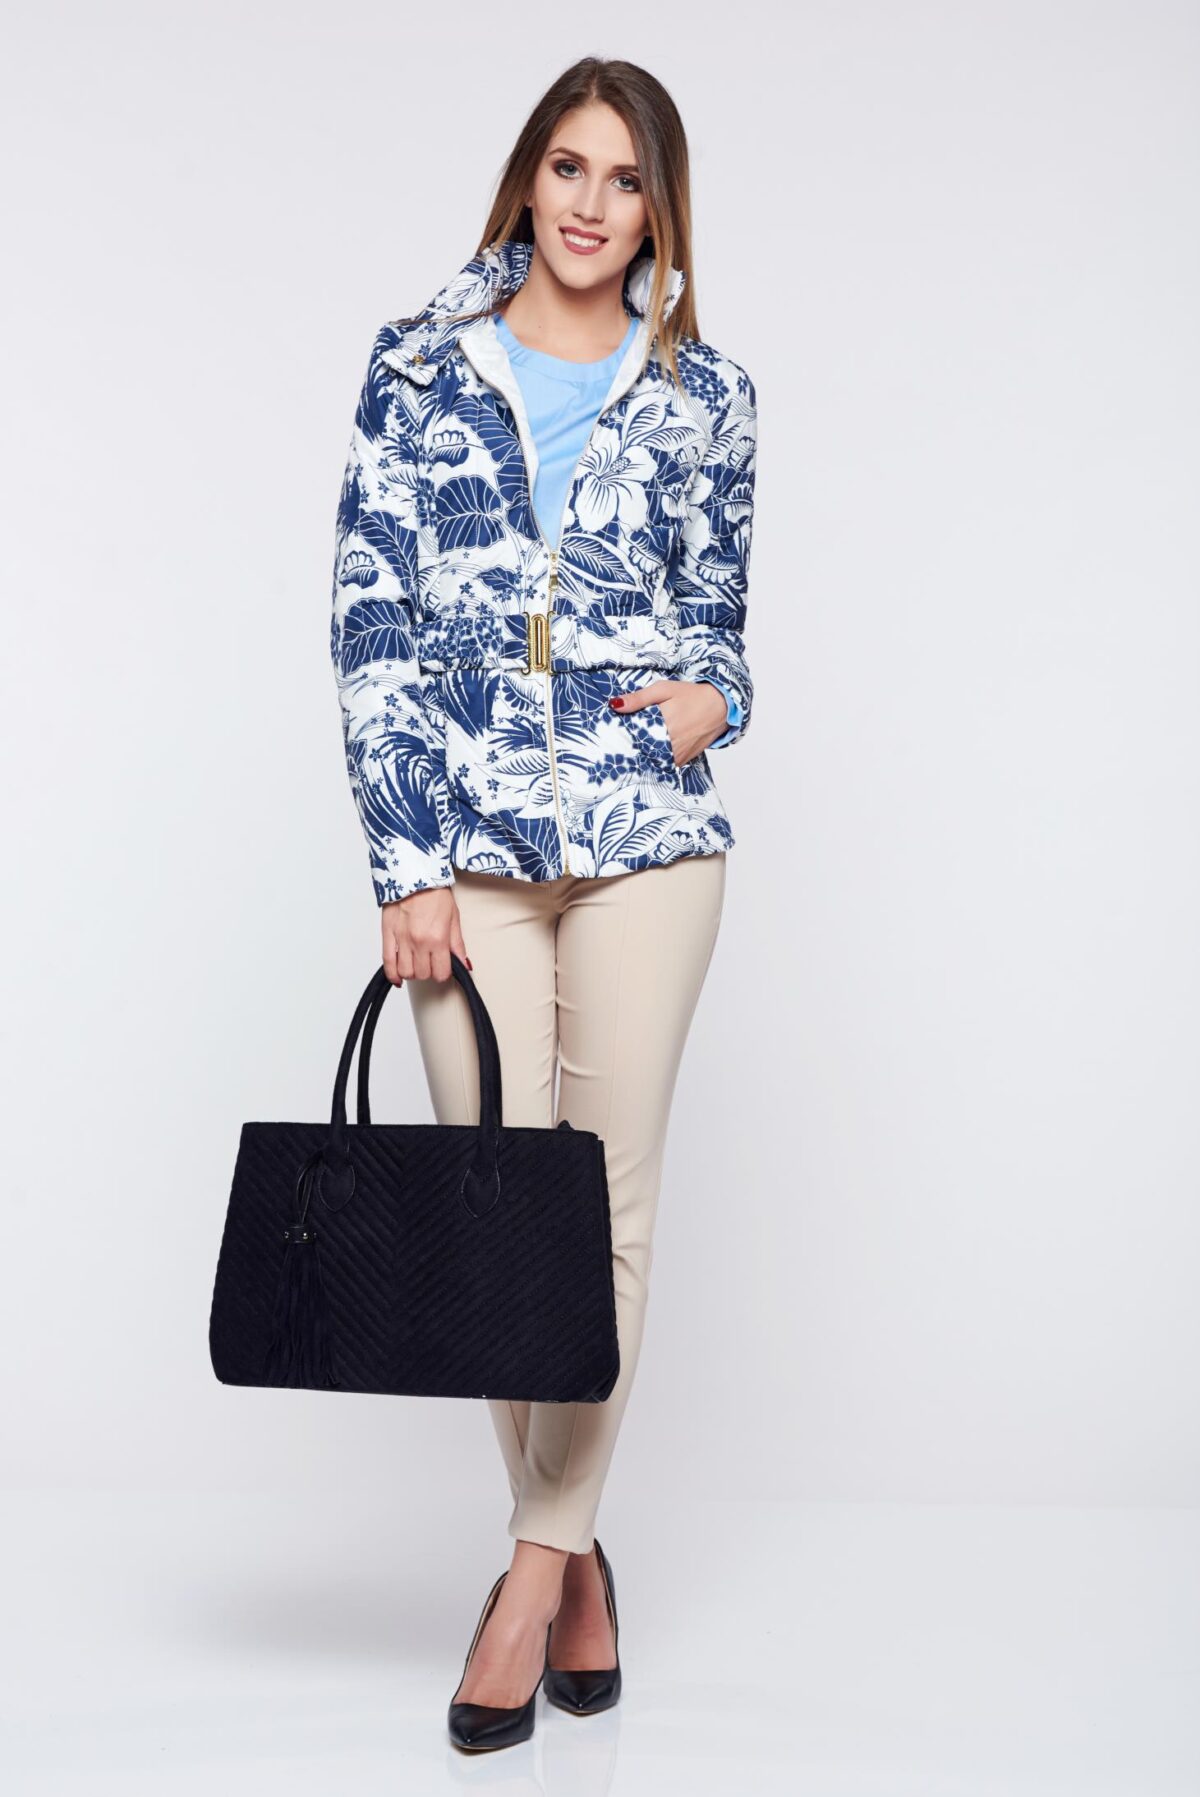 Blue Casual Jacket With Floral Prints Accessorized With Tied Waistband